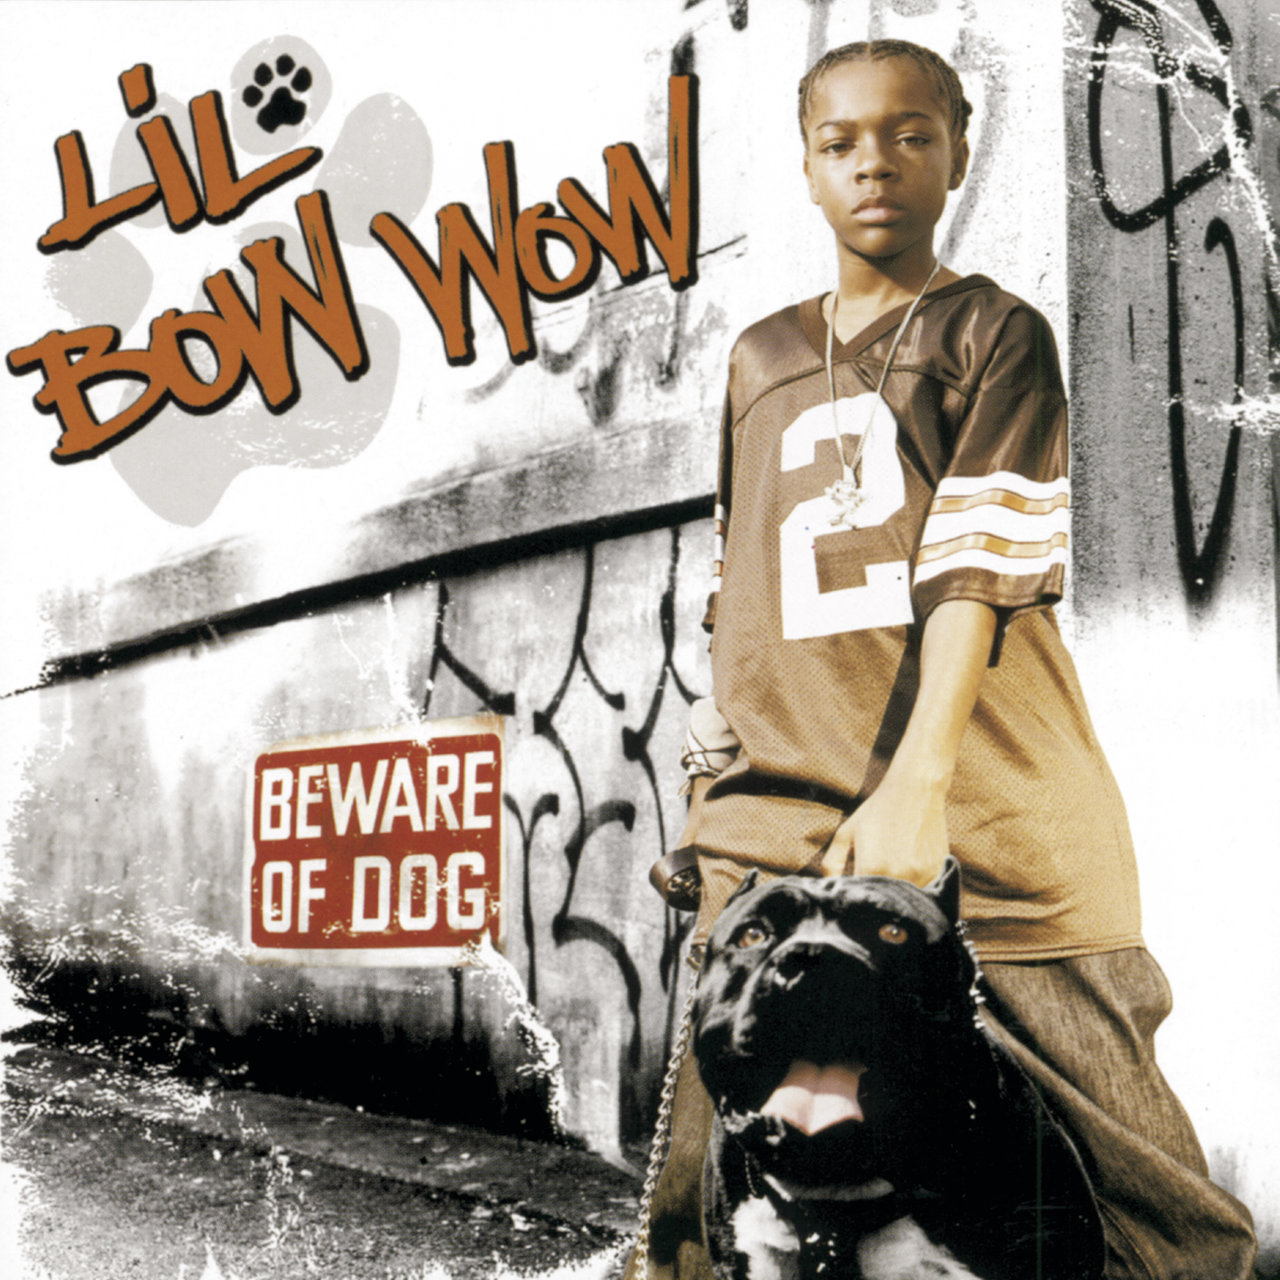 Lil Bow Wow - Beware Of Dog (Cover)